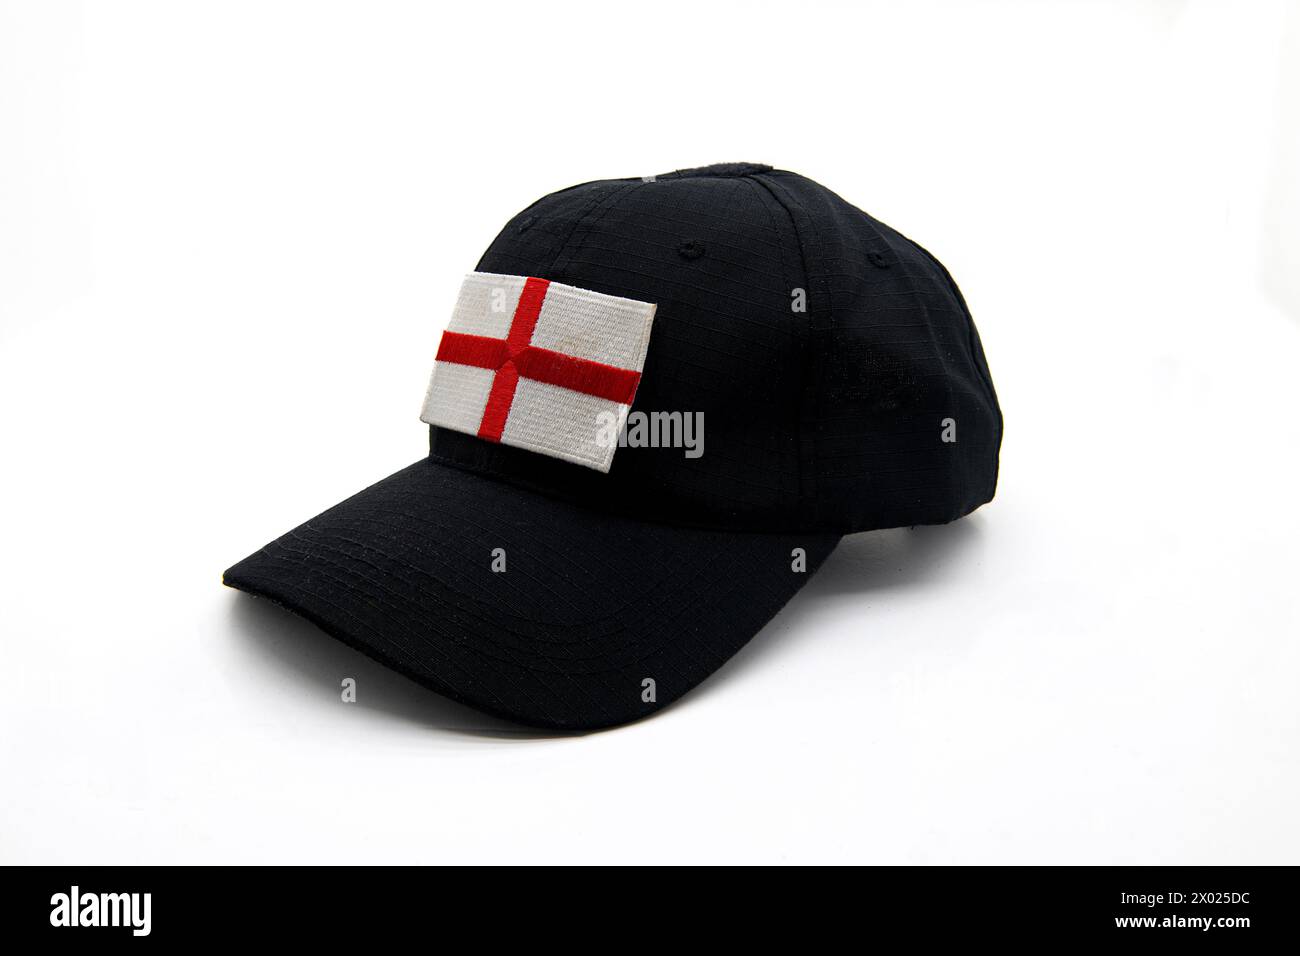 St Georges flag on cap. Stock Photo